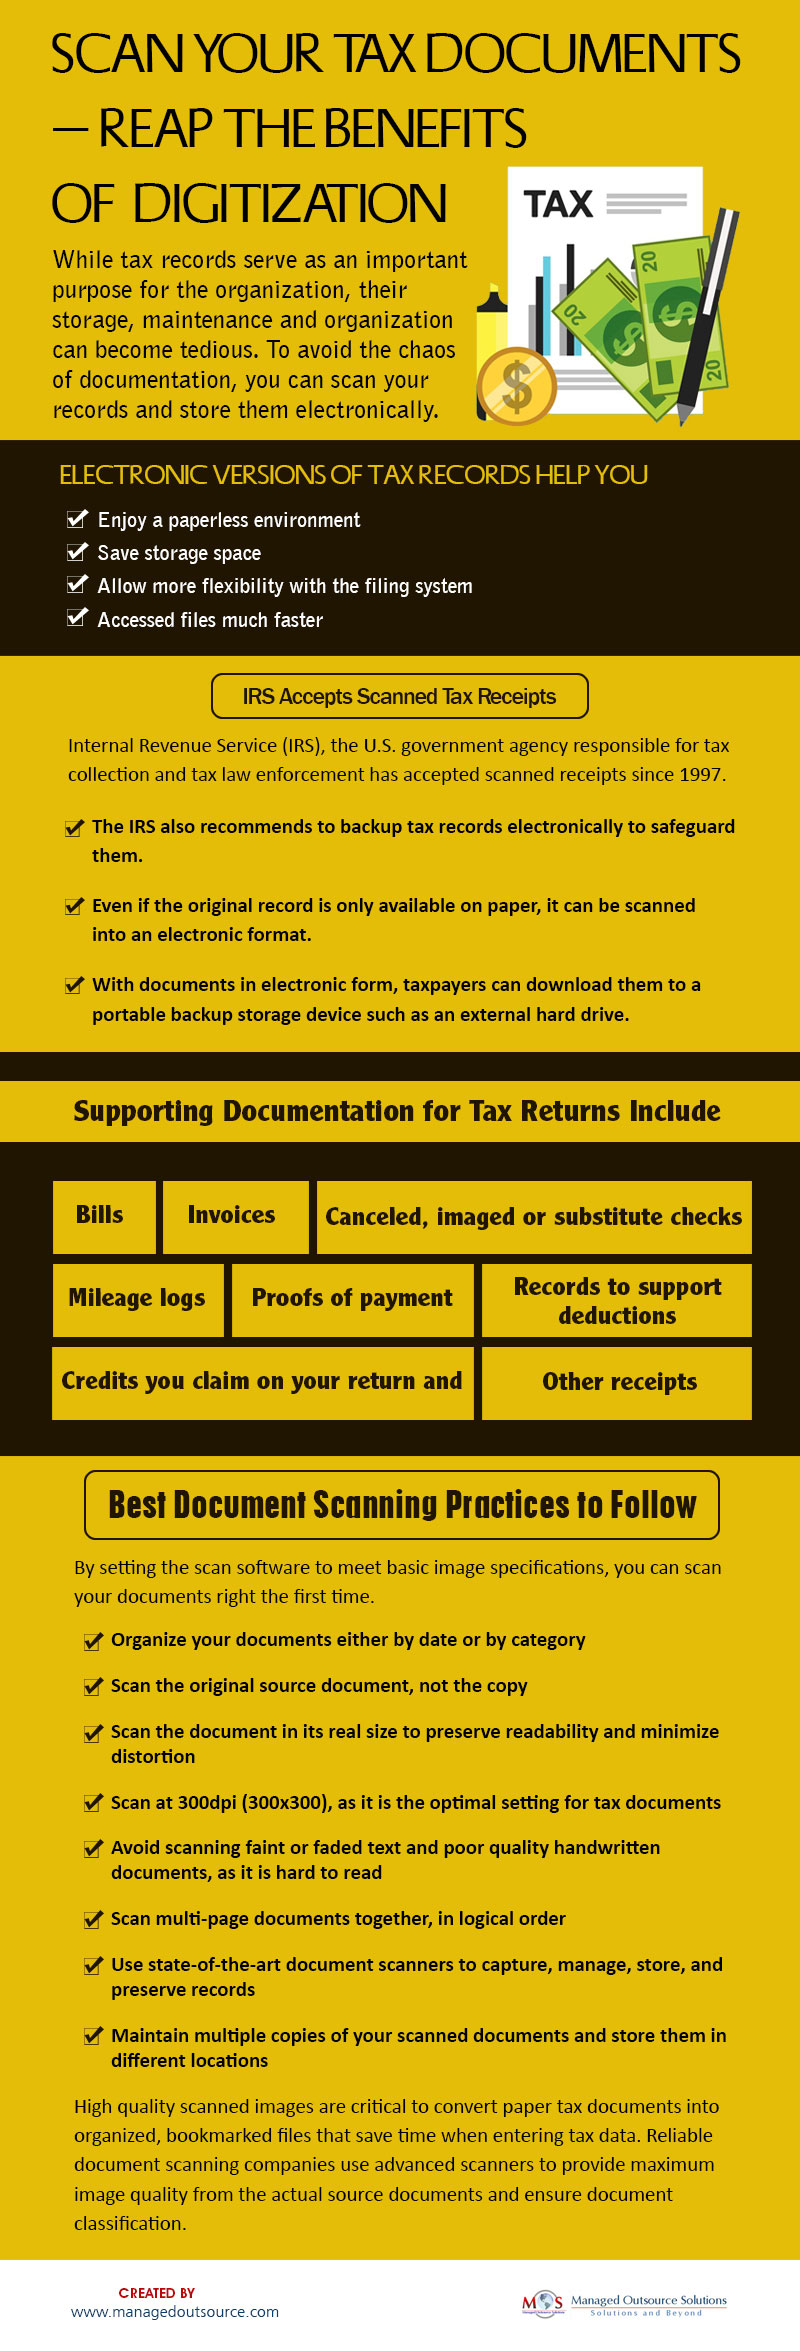 Scan Your Tax Documents